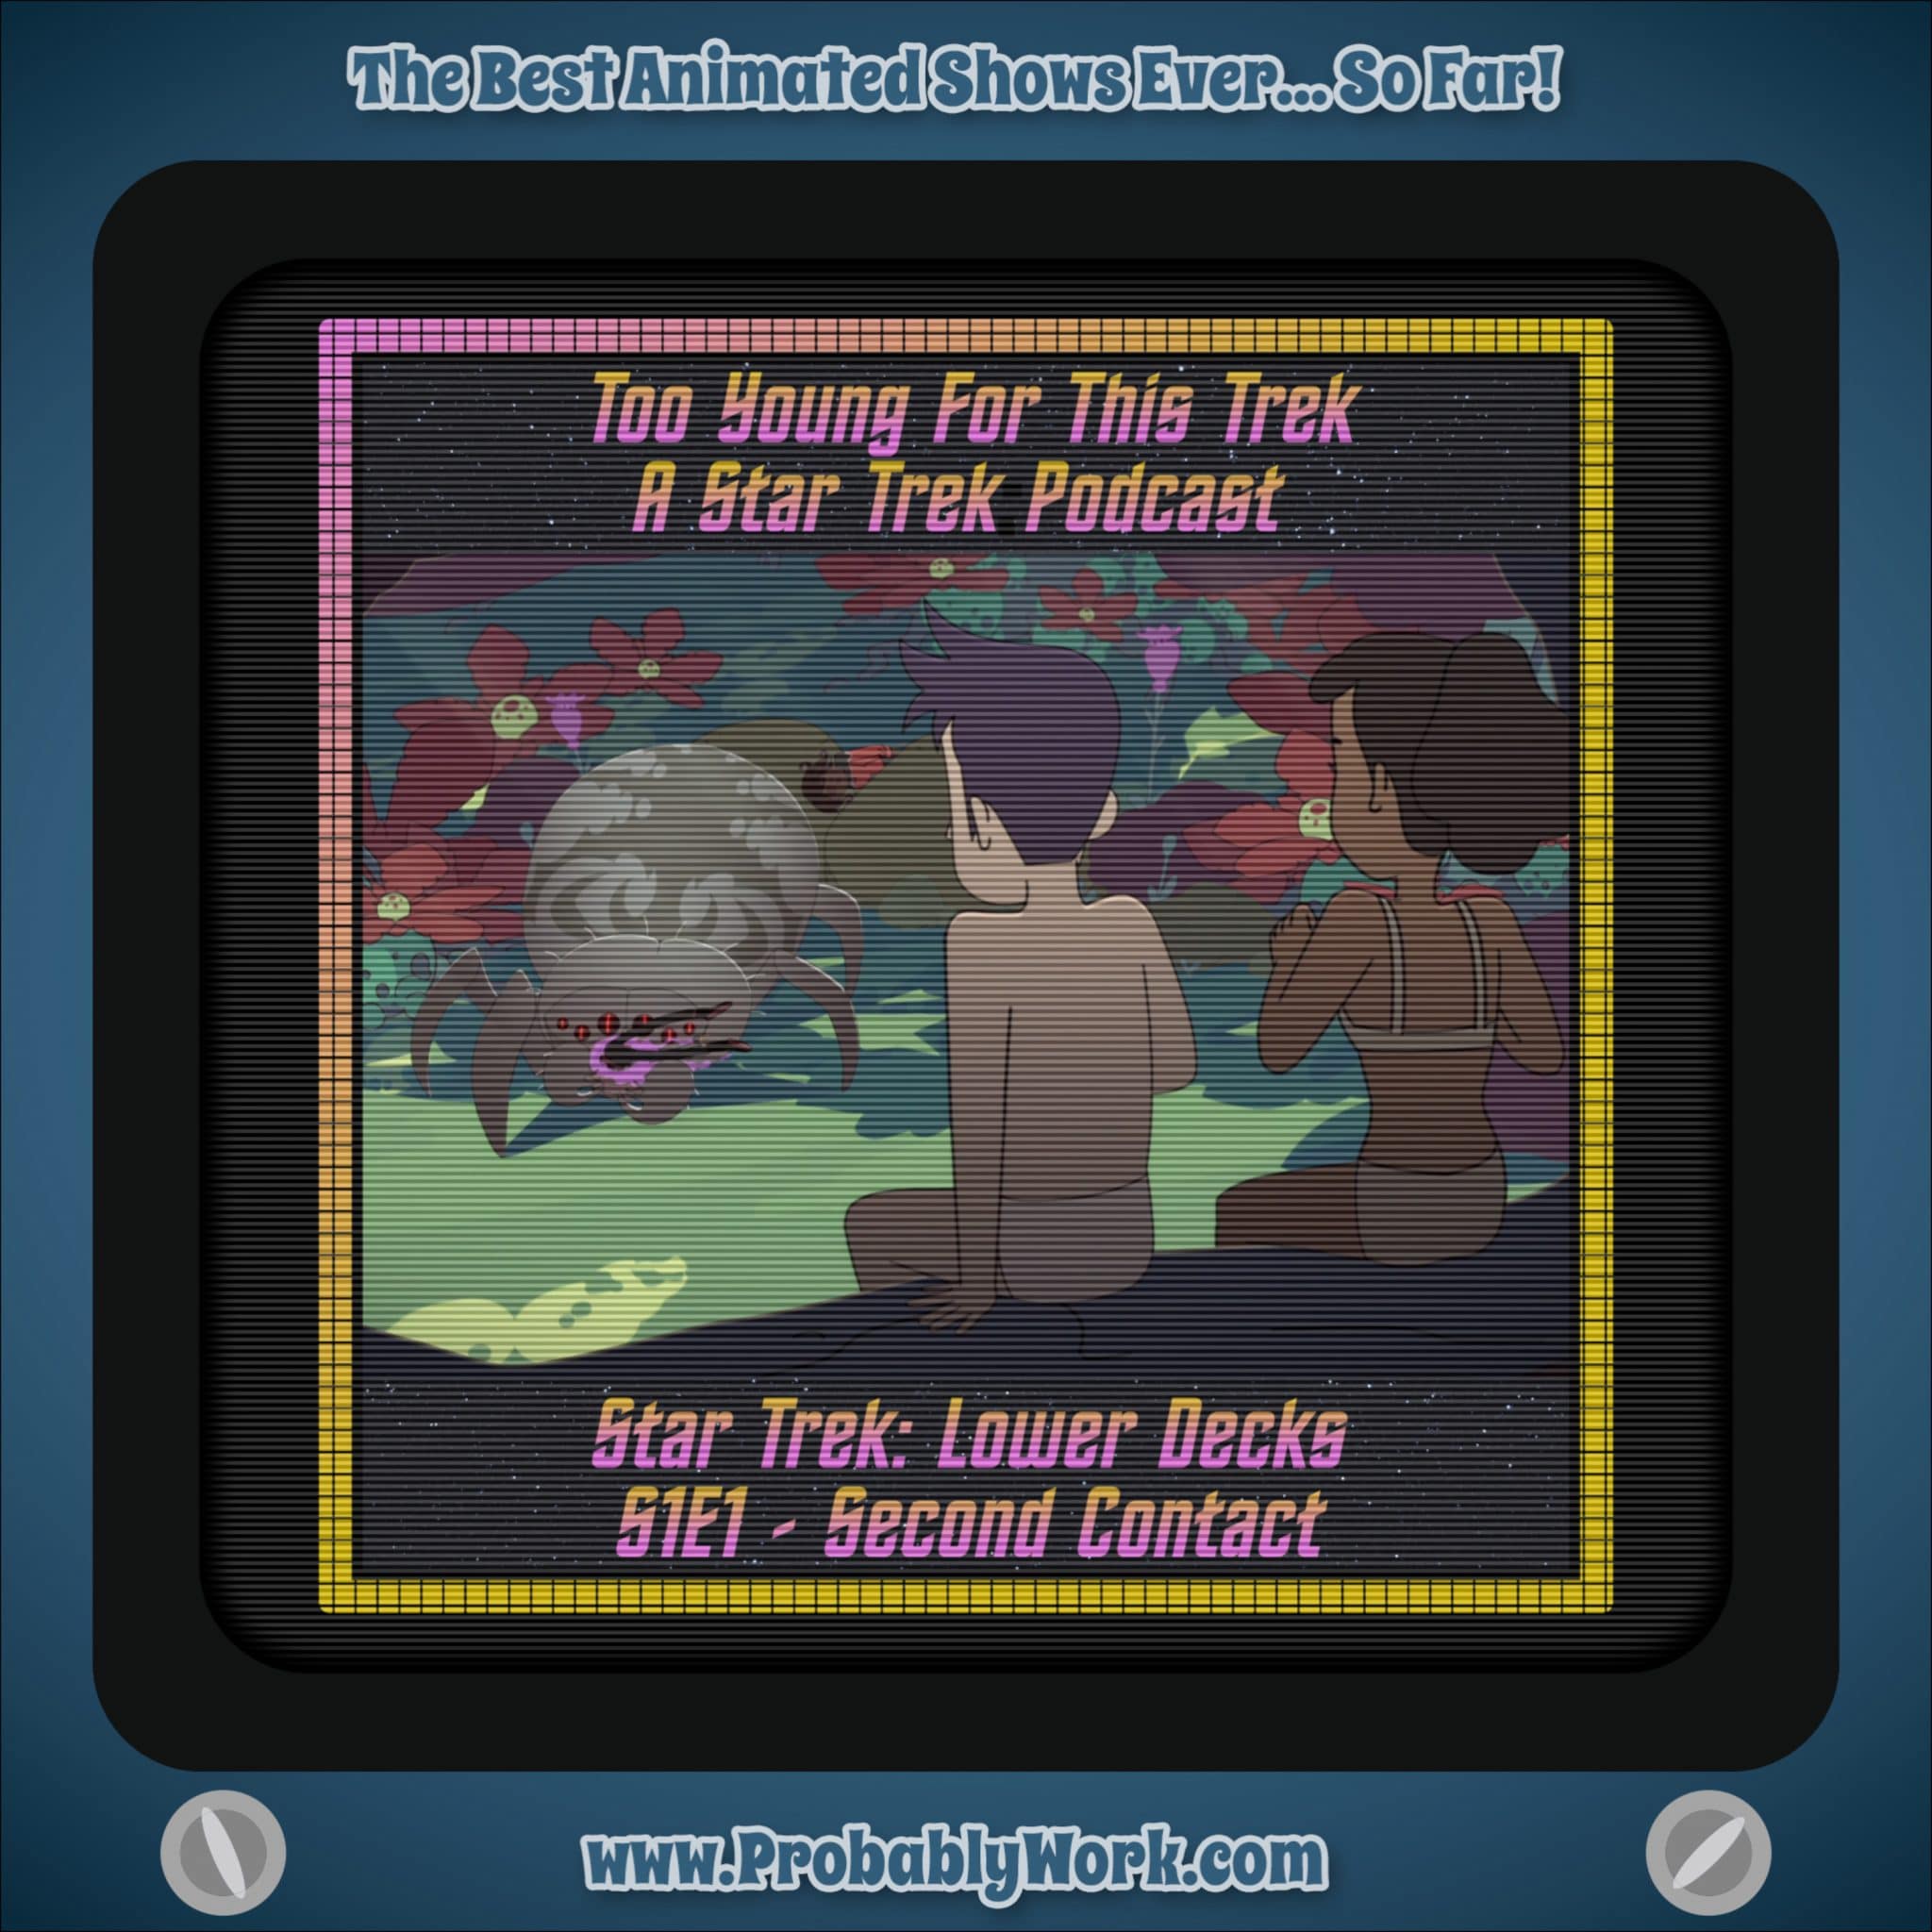 Feed Drop! Too Young For This Trek discusses Star Trek: Lower Decks